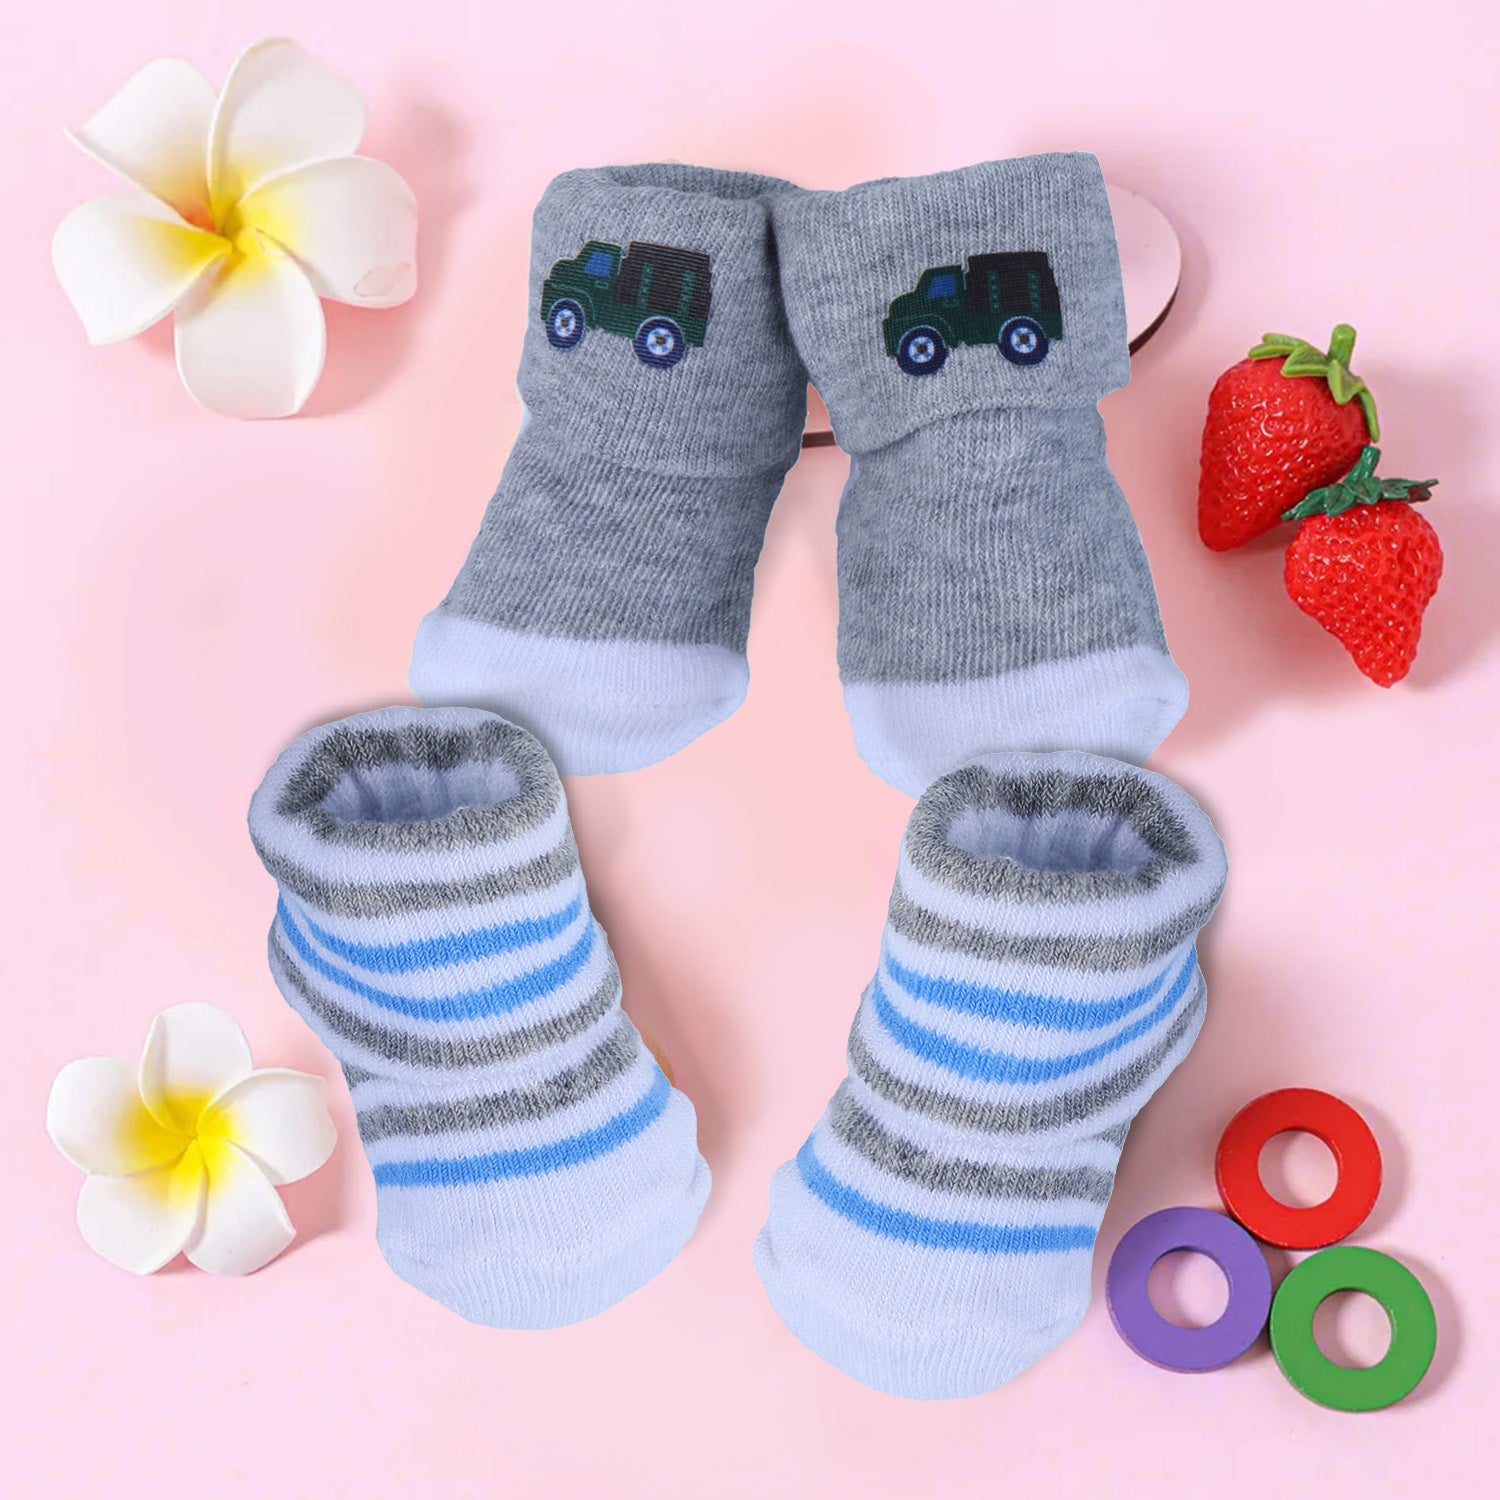 Baby Moo Truck And Stripes Newborn Breathable Infant Cotton Socks - Grey - Baby Moo